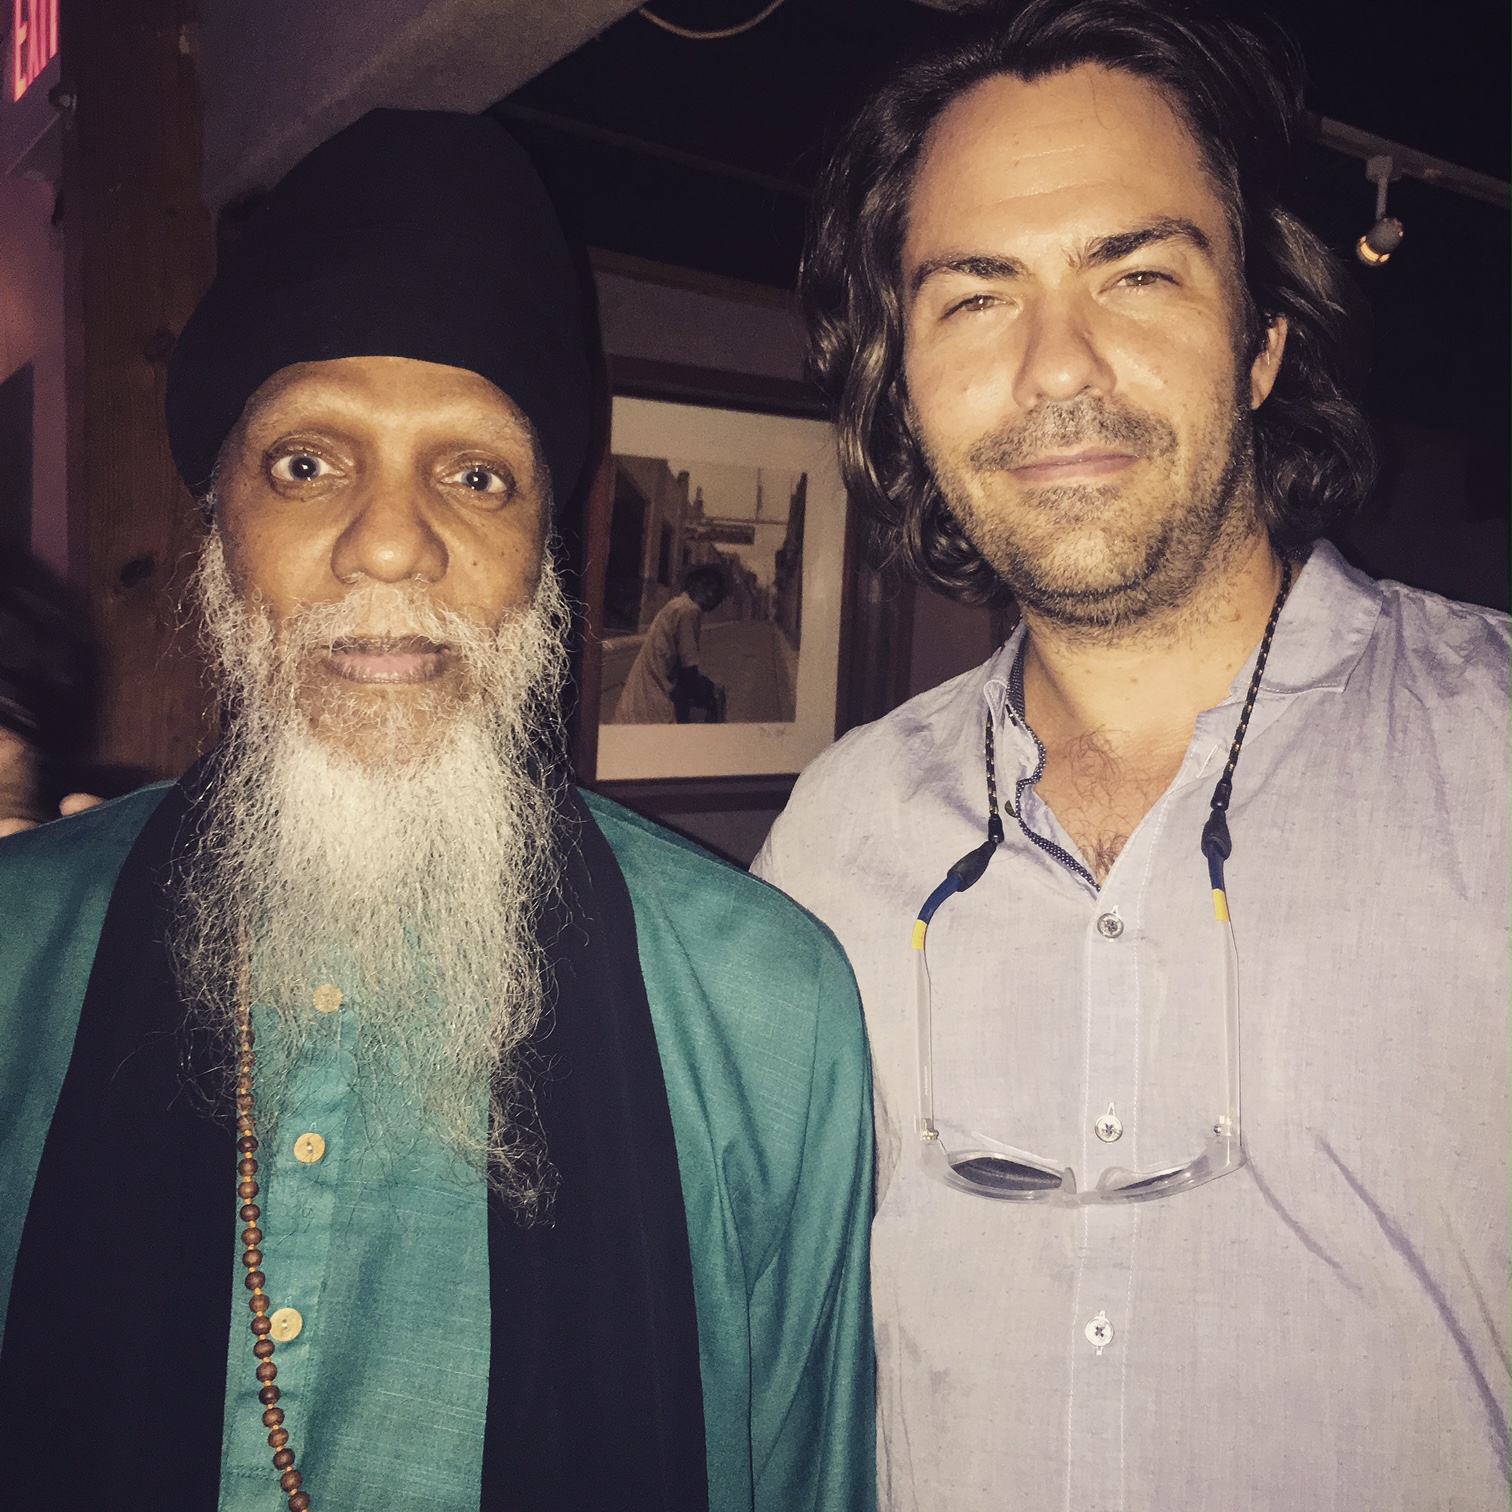  Dr. Lonnie Smith at Snug Harbor in New Orleans 